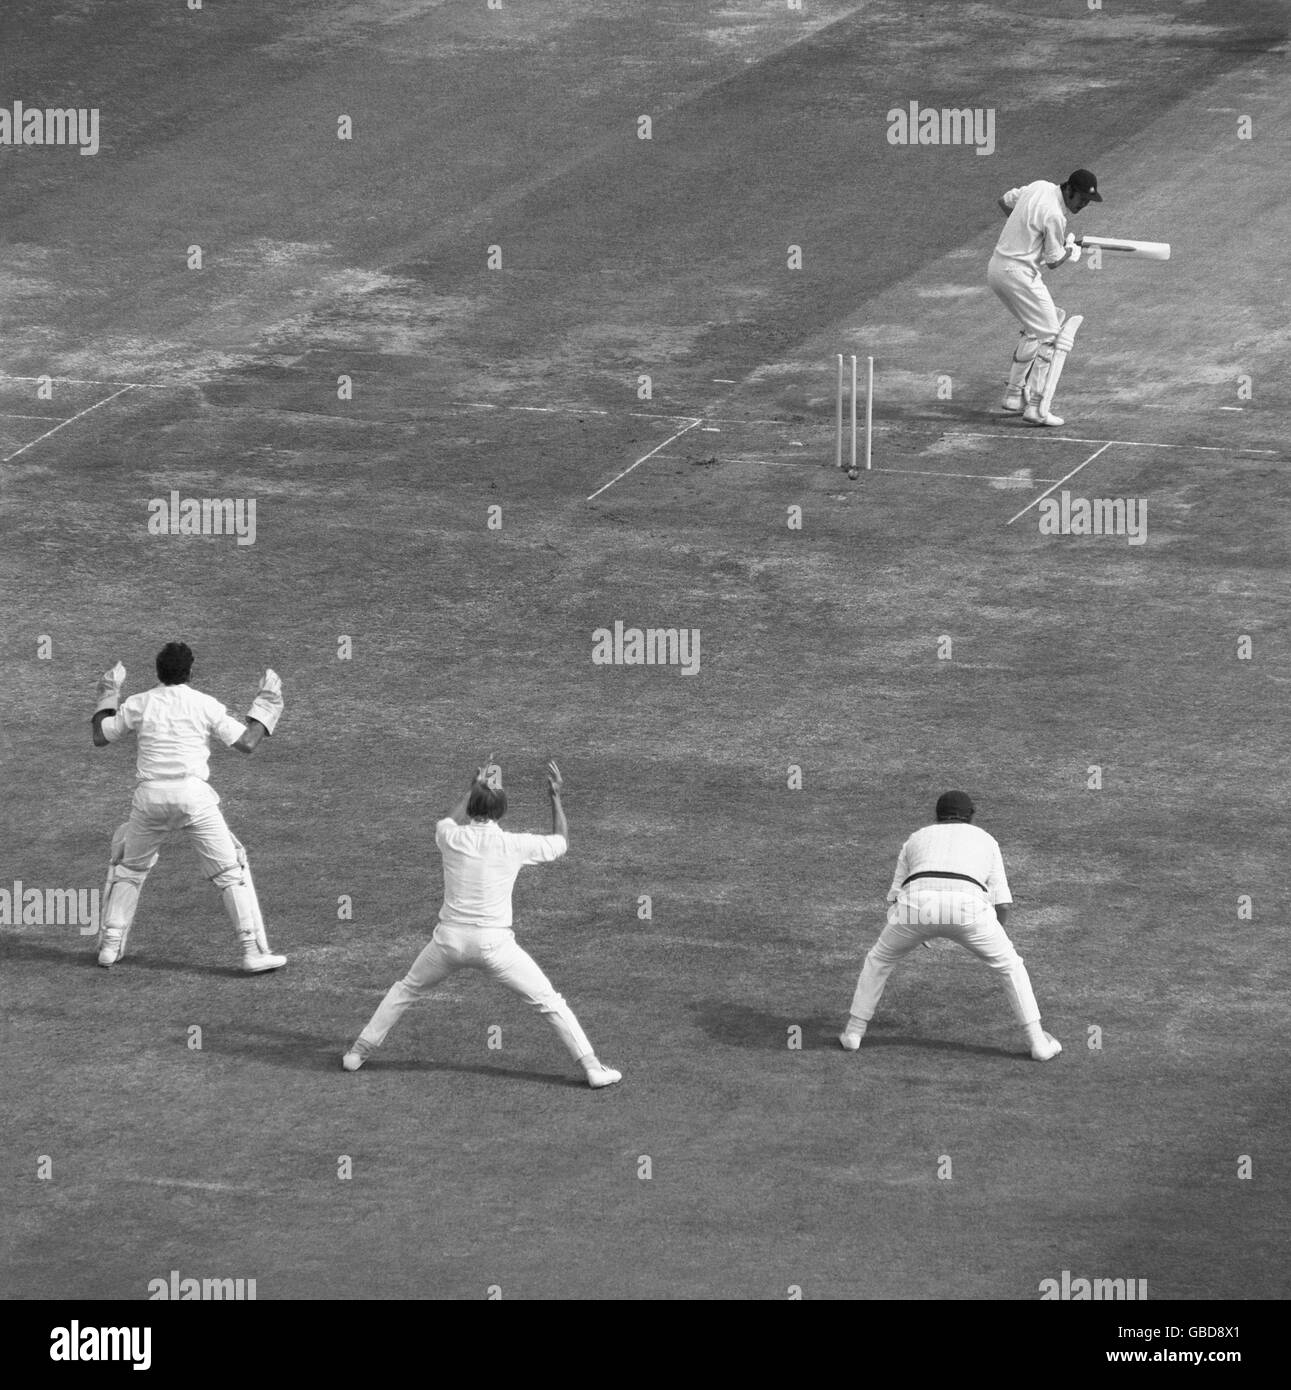 Cricket - Gillette Cup Final, 1975 - Lancashire v Middlesex - Lord's. Middlesex's Mike Smith (top right) is bowled by Lancashire's Peter Lever (not pictured) for 12 runs. Stock Photo